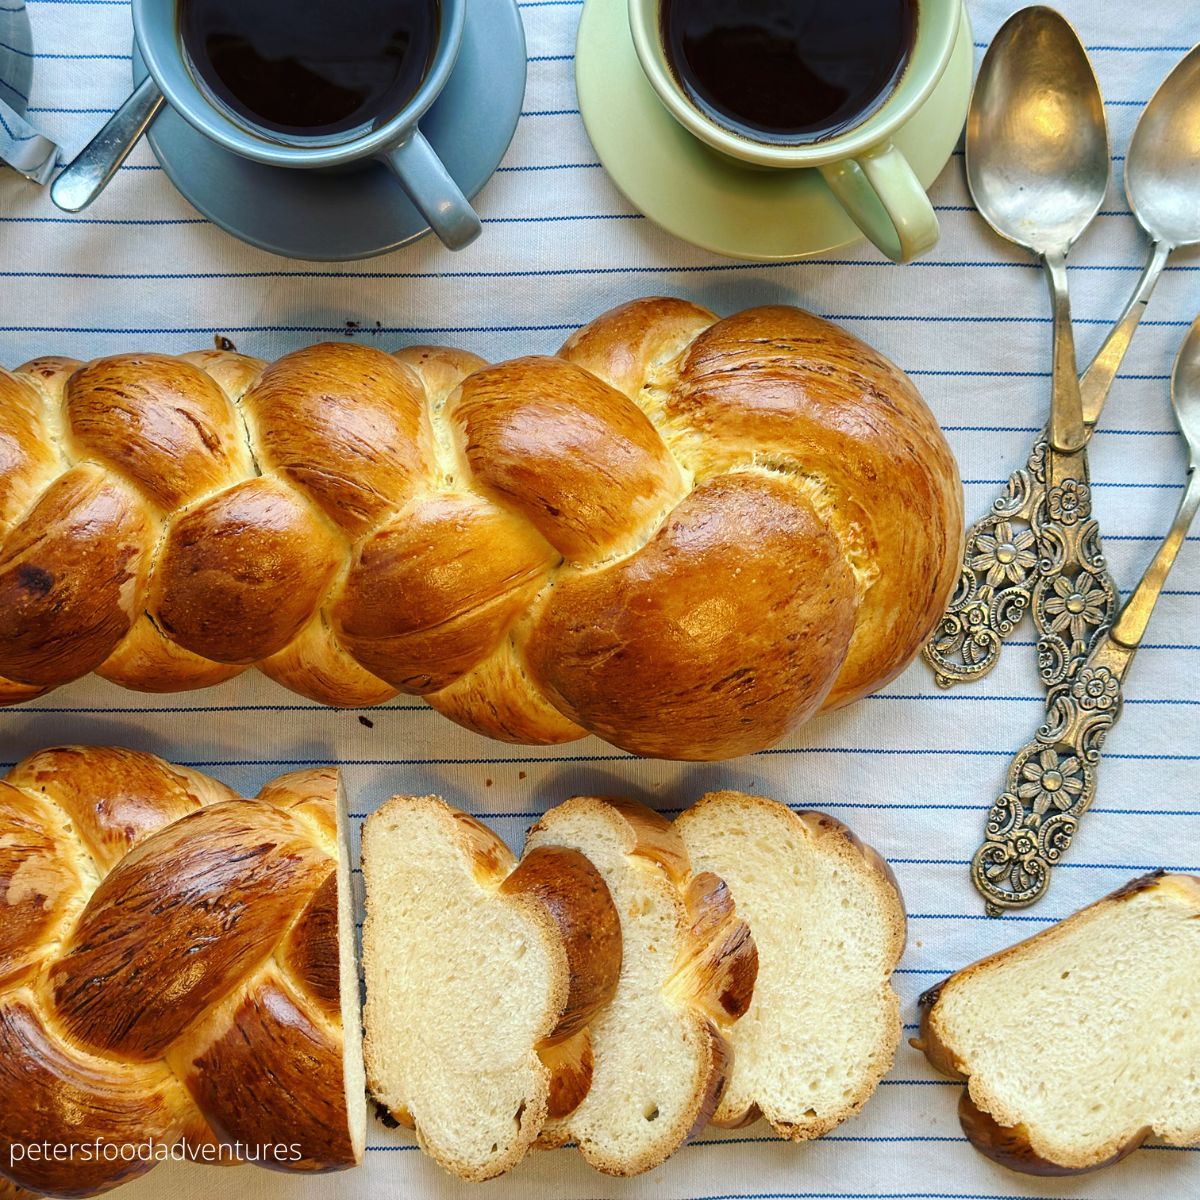 zopf braided bread on table